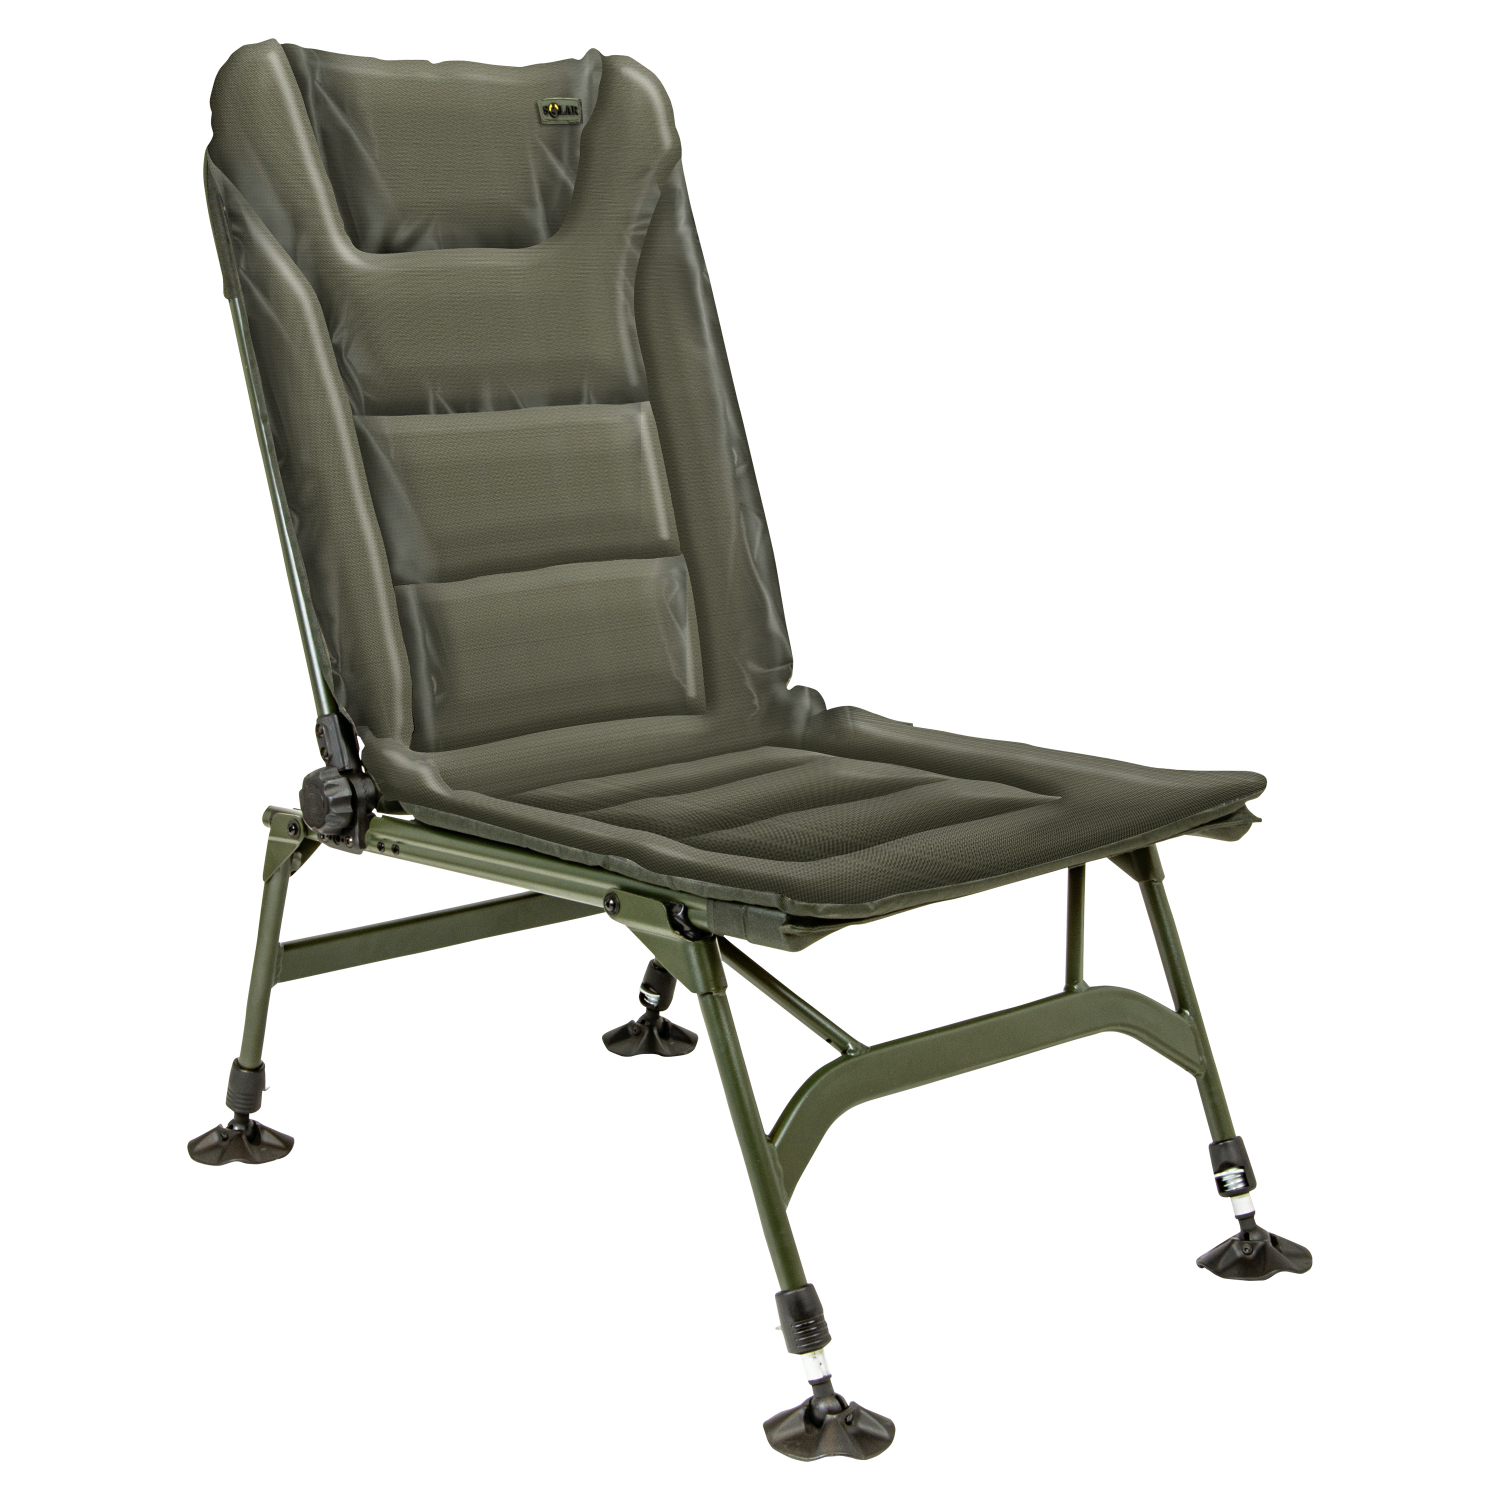 Solar Tackle Carp chair UnderCover Session Chair (green) at low